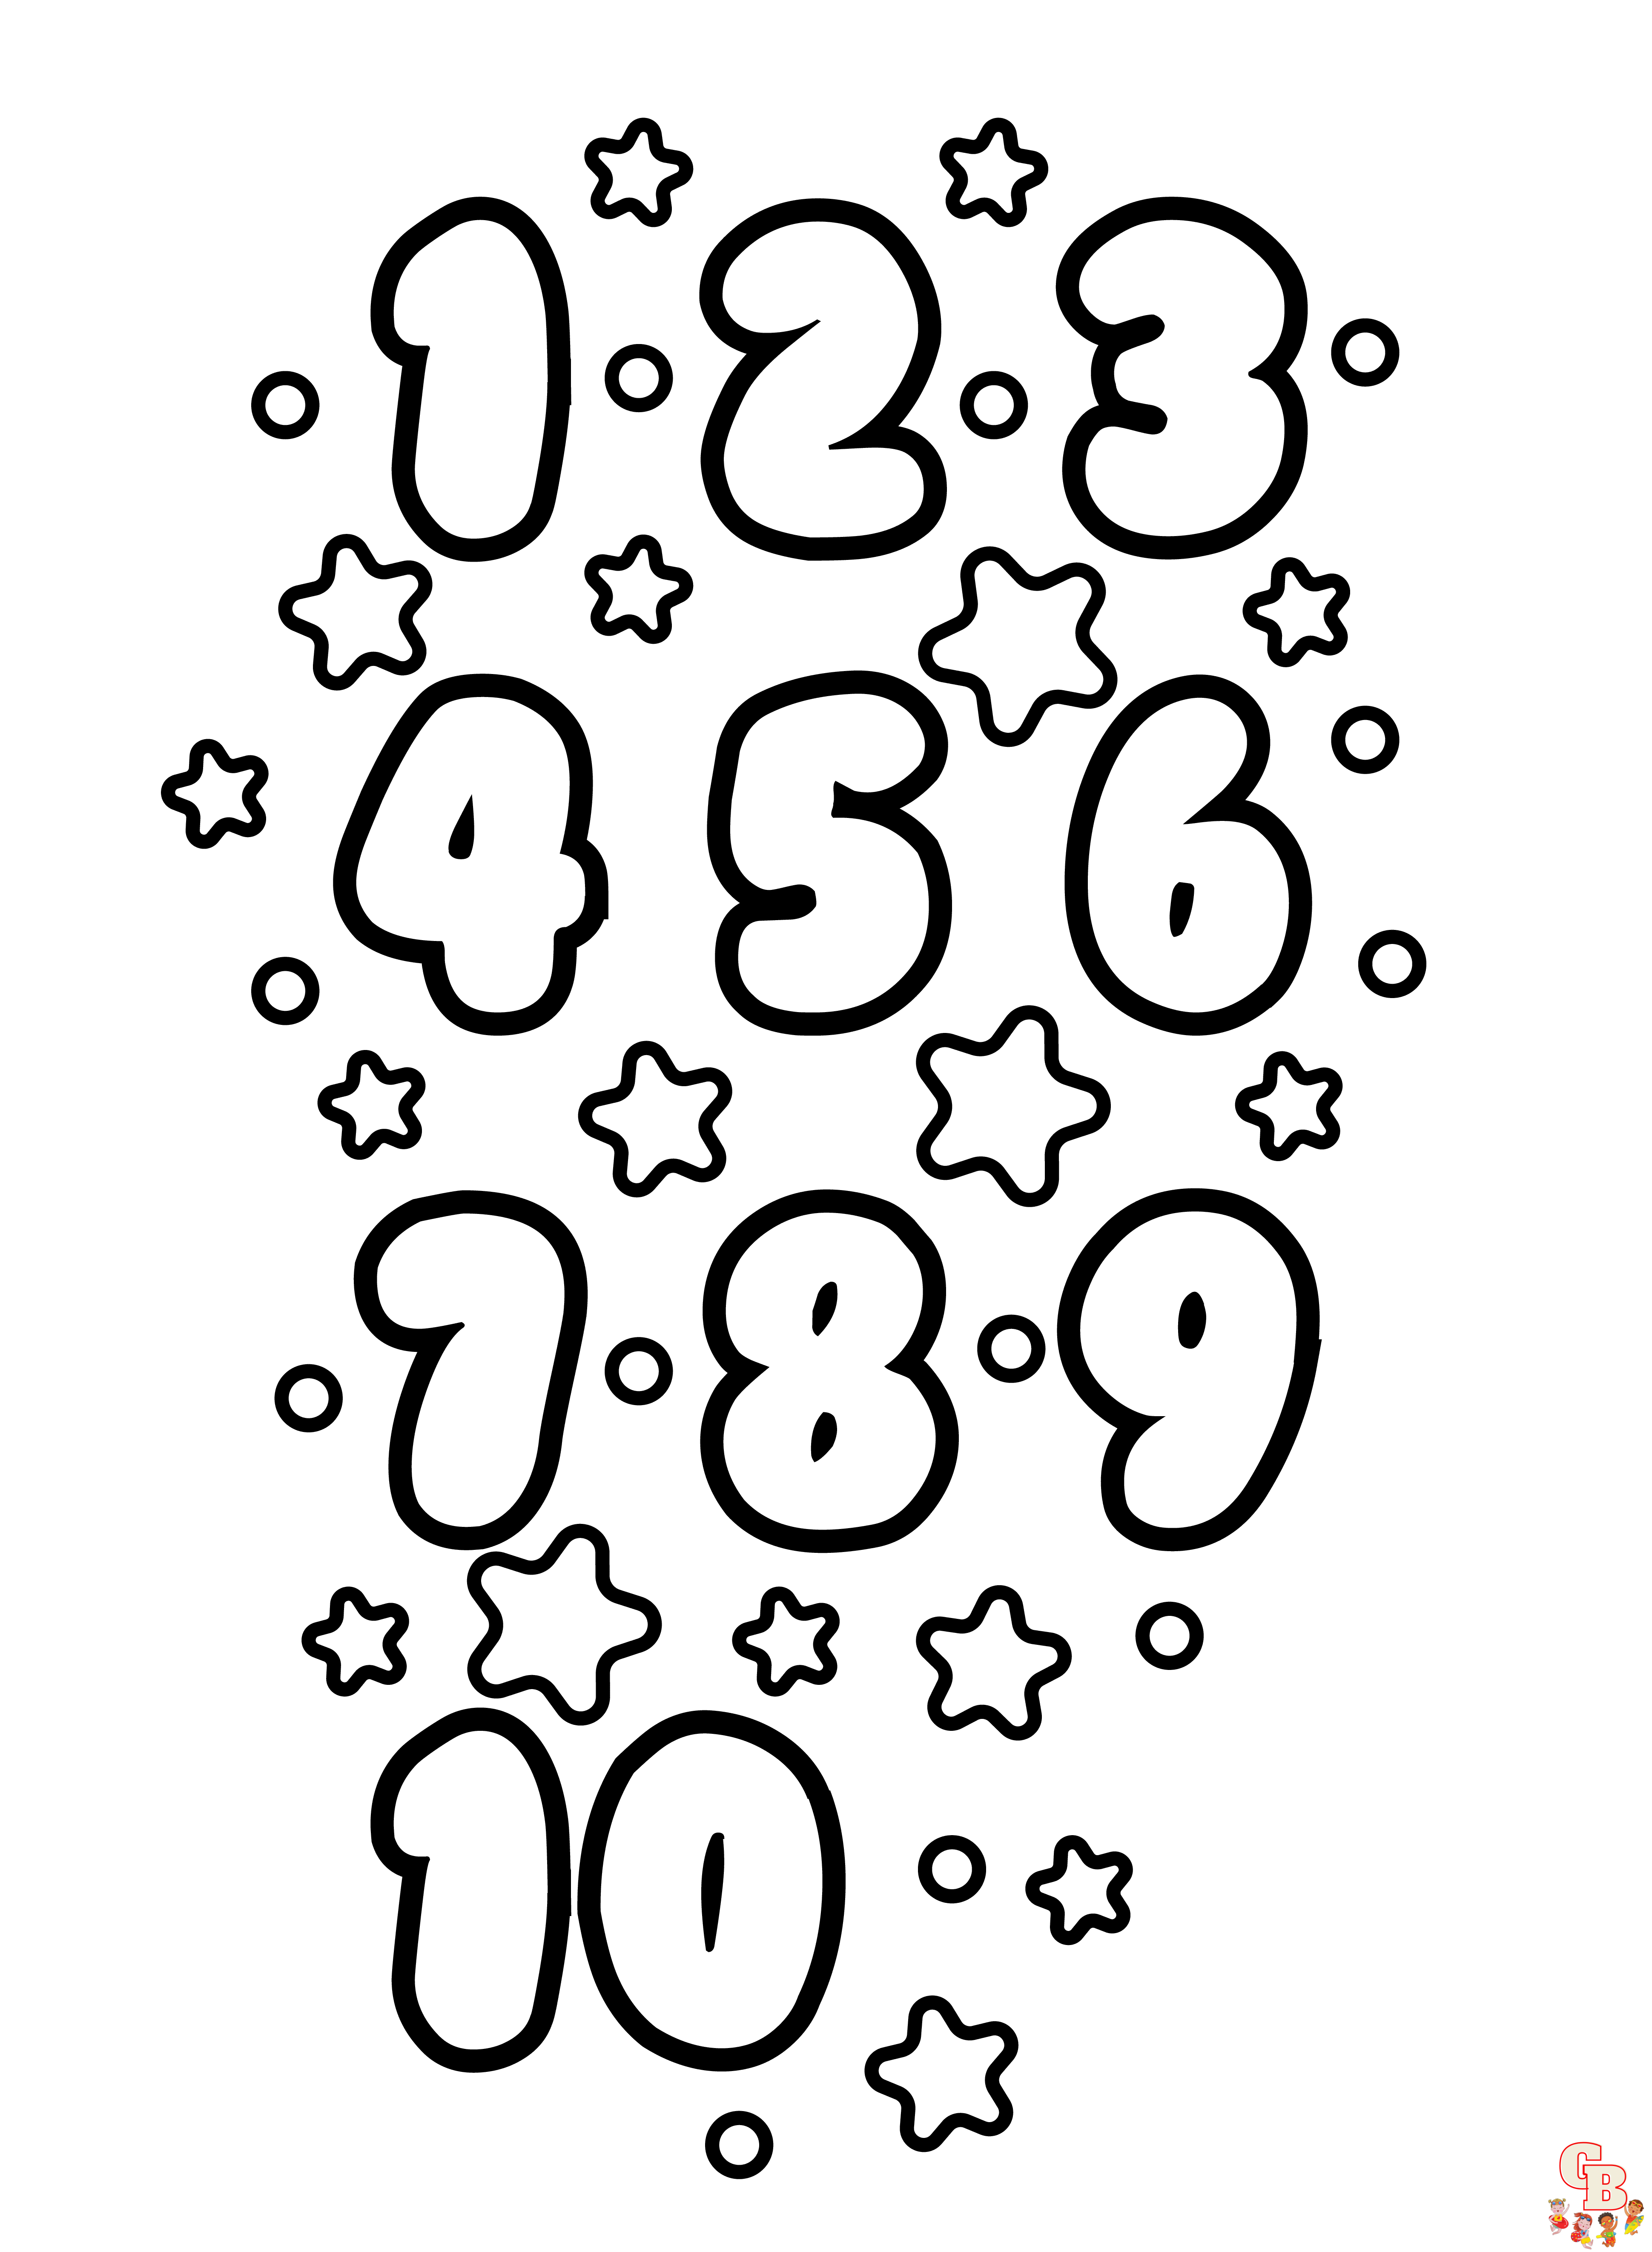 Printable number coloring pages free for kids and adults